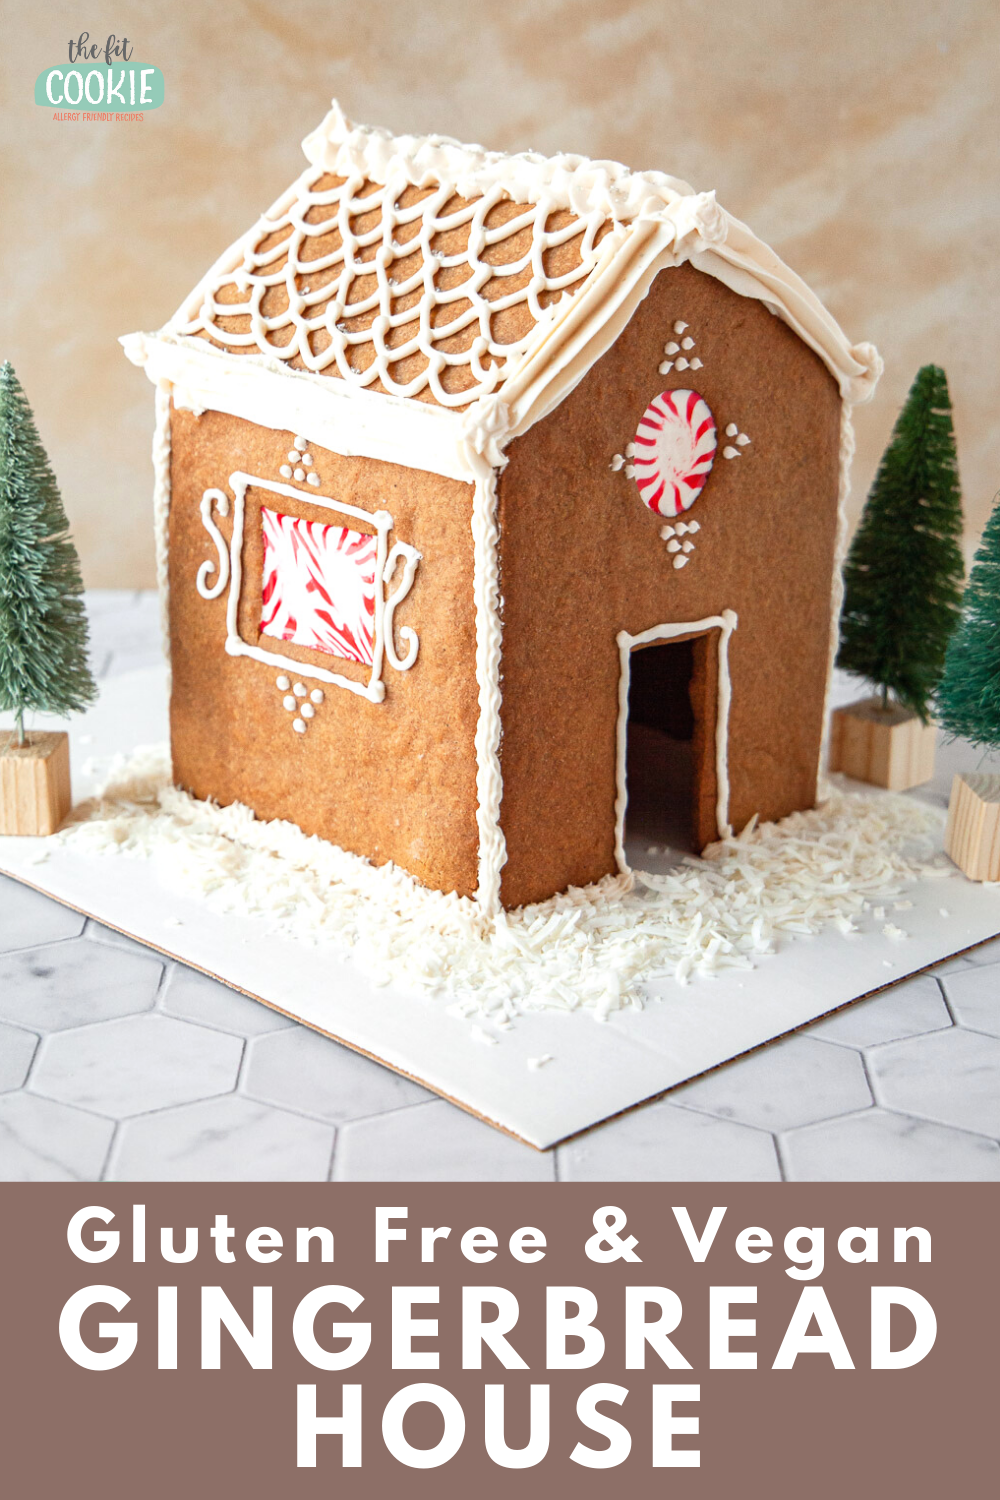 photo of decorated gingerbread house with text overlay 